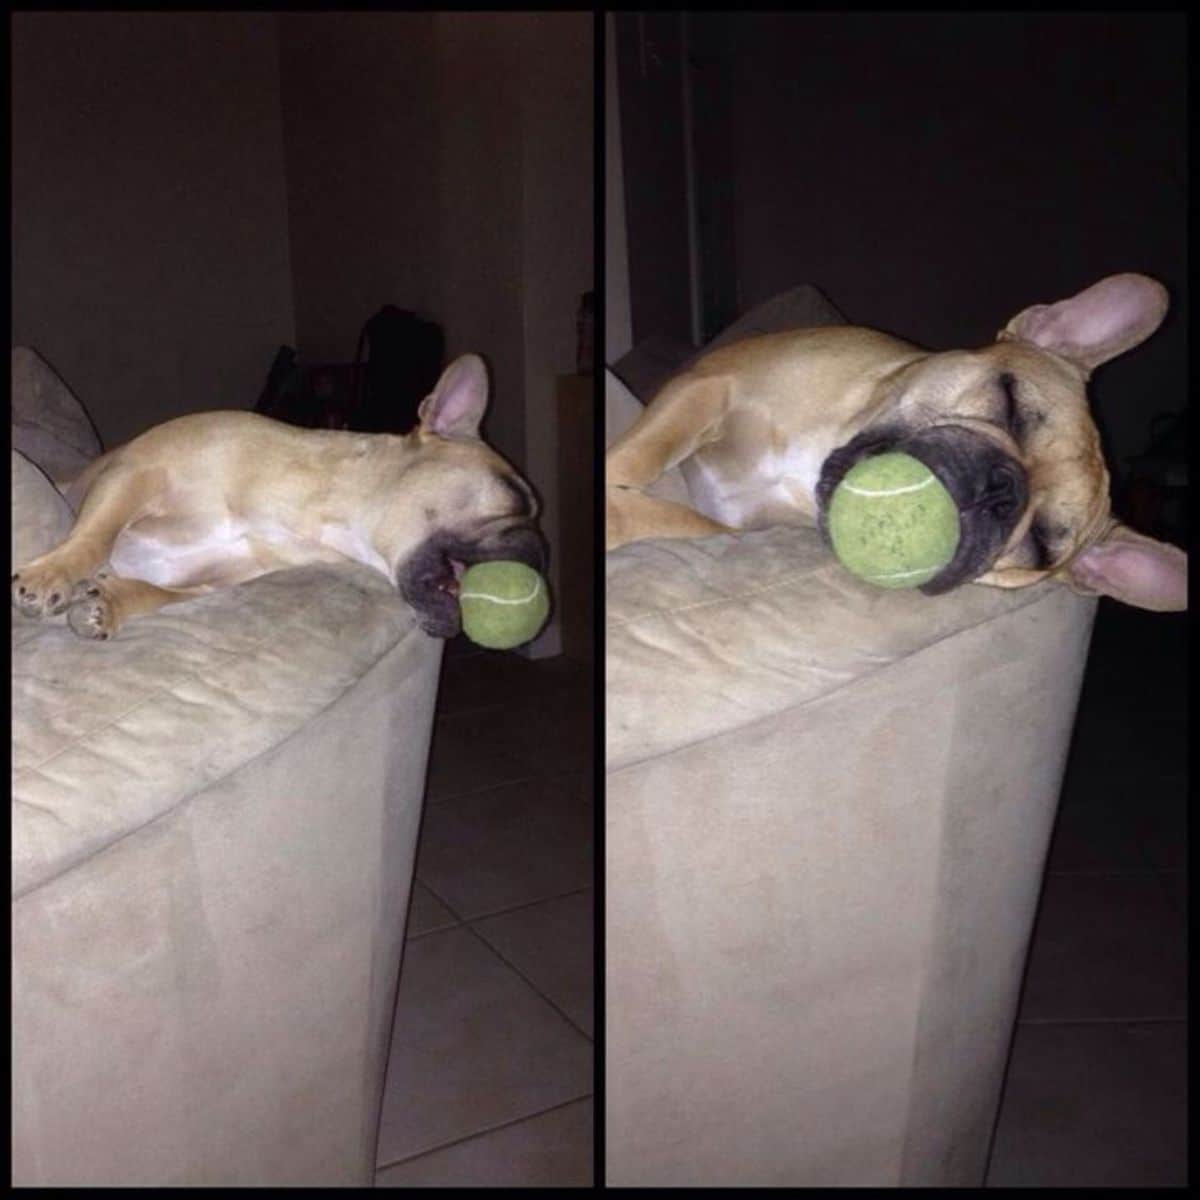 2 photos of a brown dog sleeping with a tennis ball in its mouth